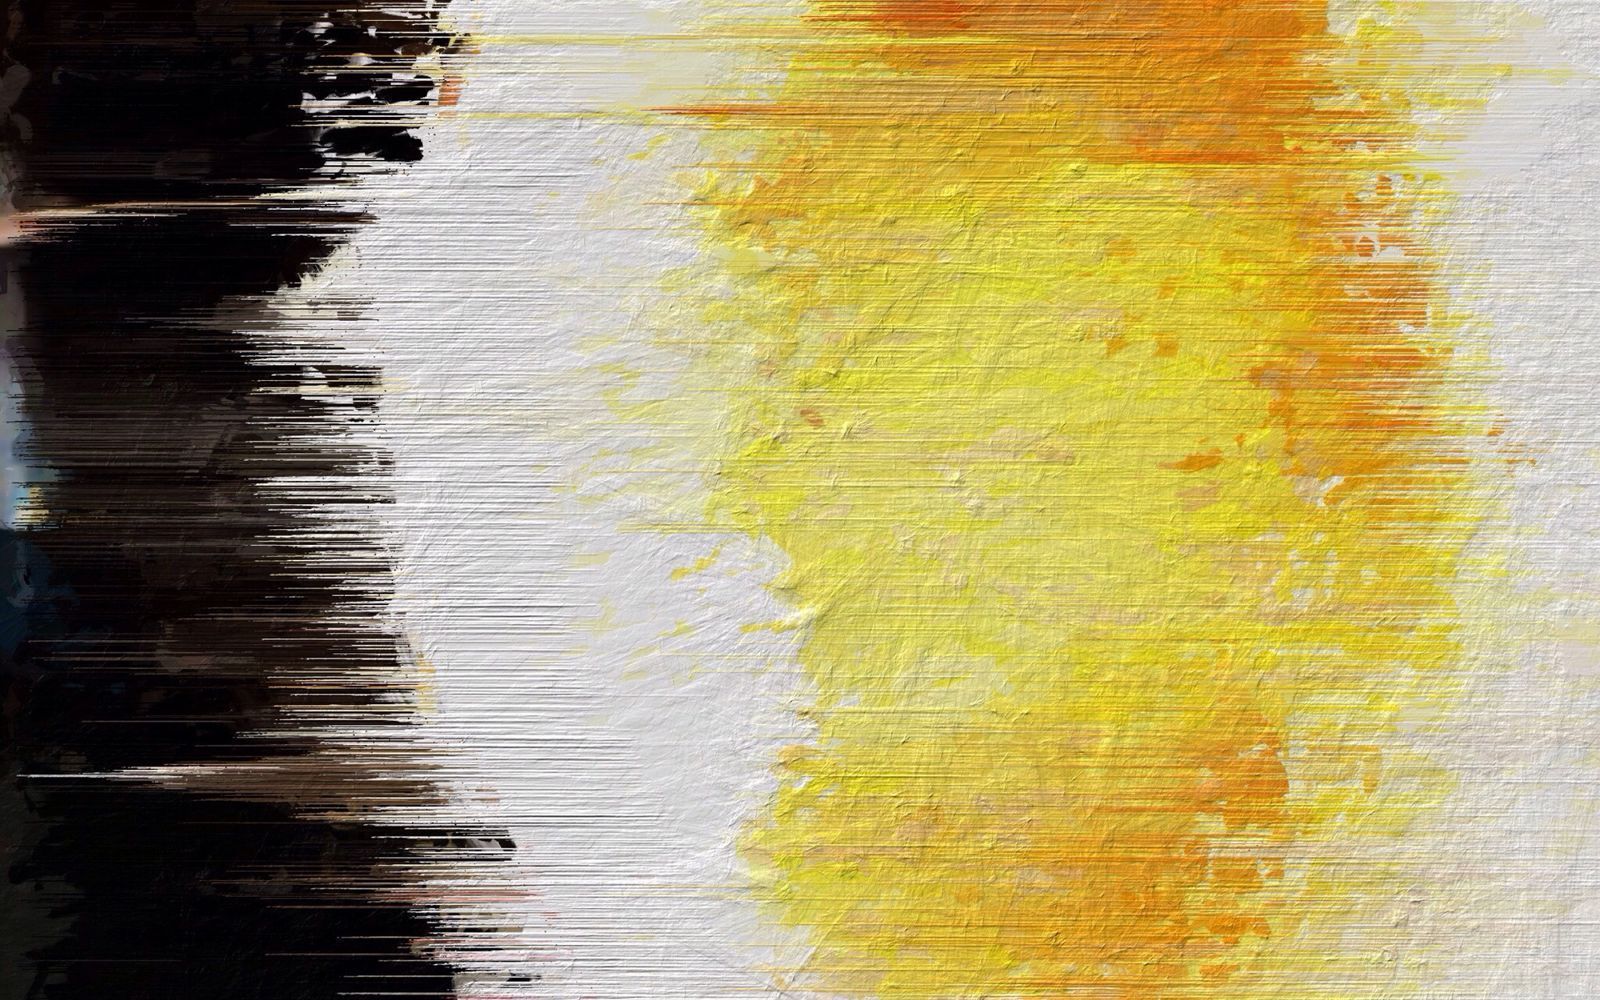 Black White Yellow Painted Brushed Design Cover Photo Wallpaper